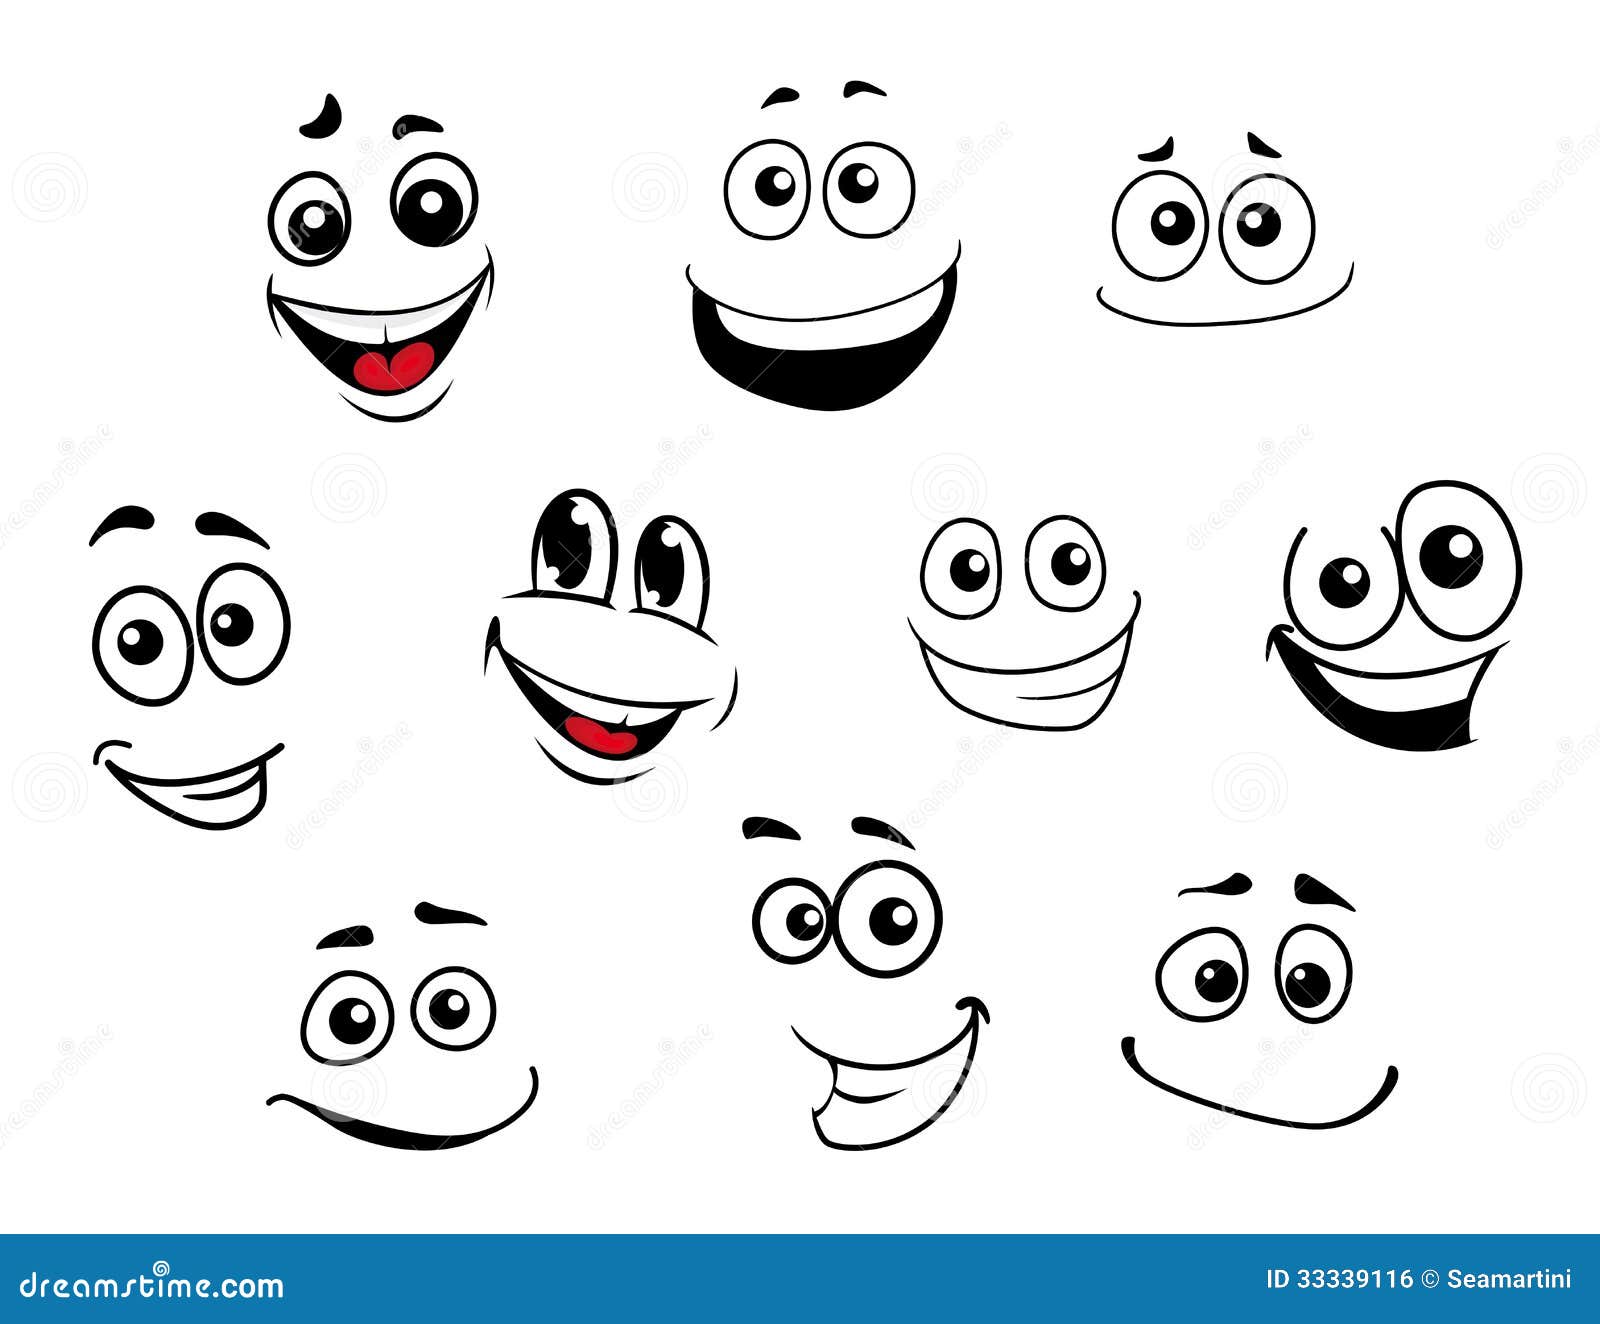 emotions clipart black and white - photo #35